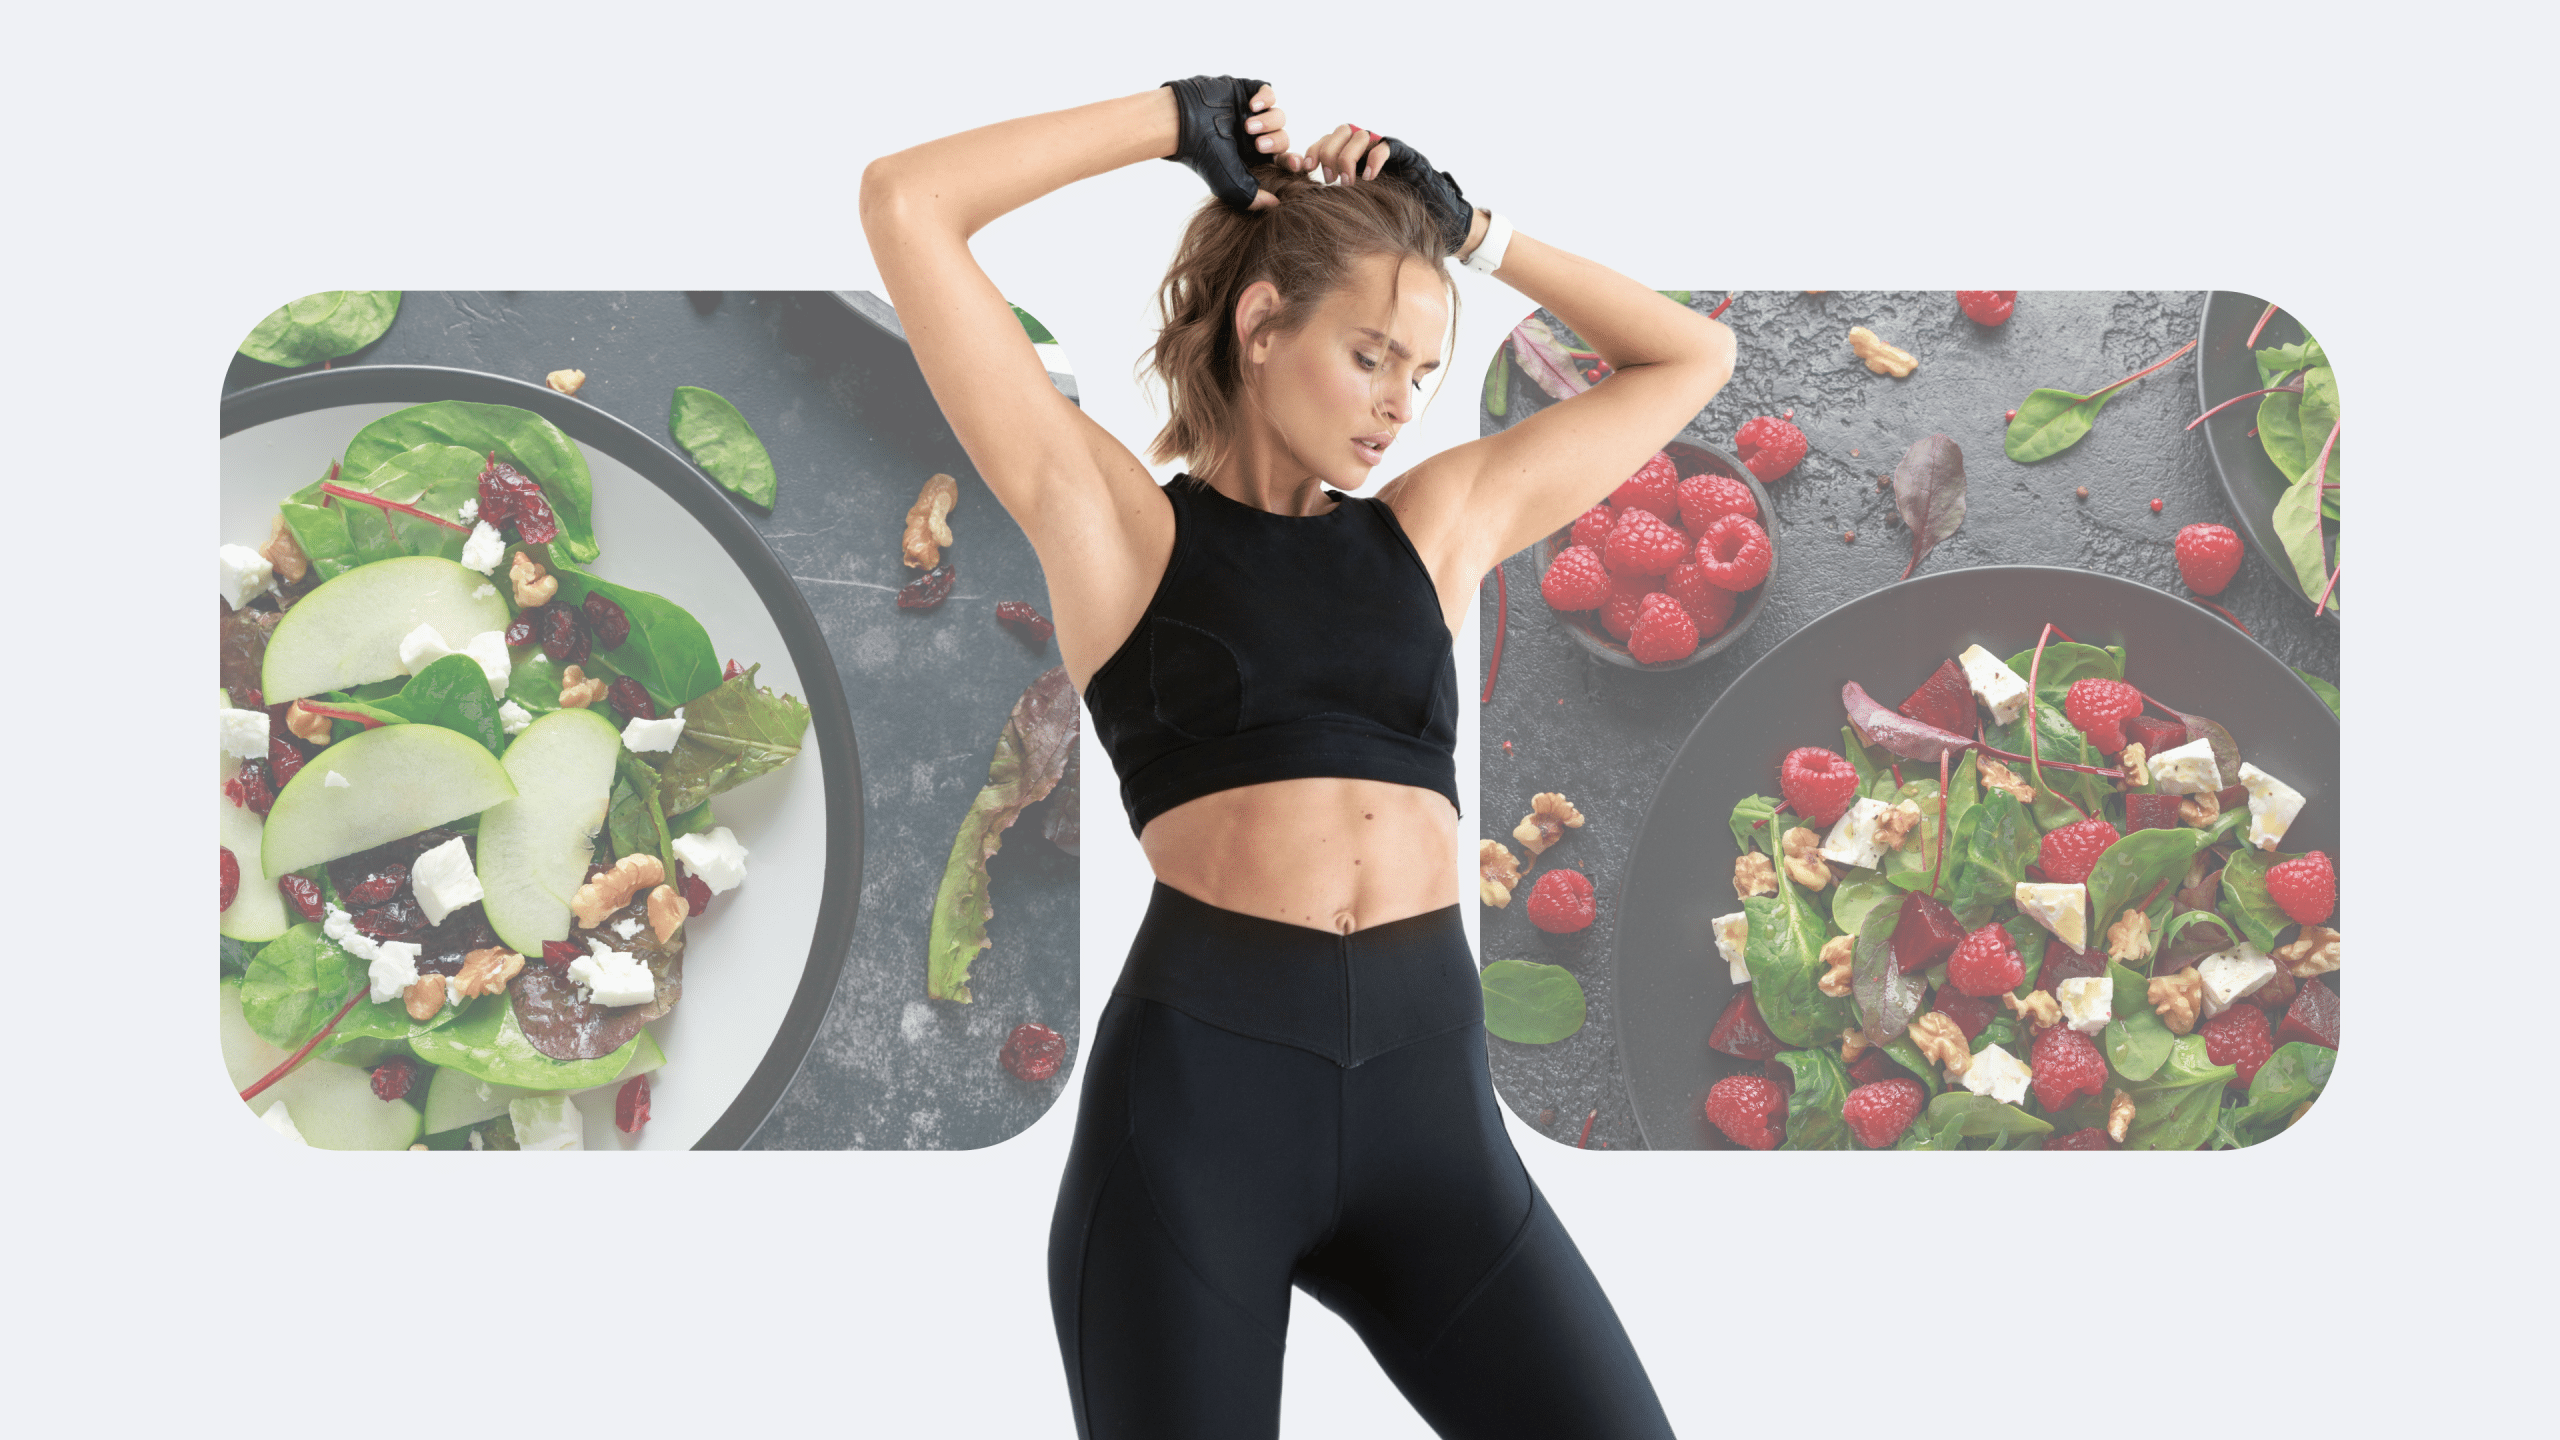 7-Day Diet Plan To Lose 10 Pounds For People In A Time Crunch